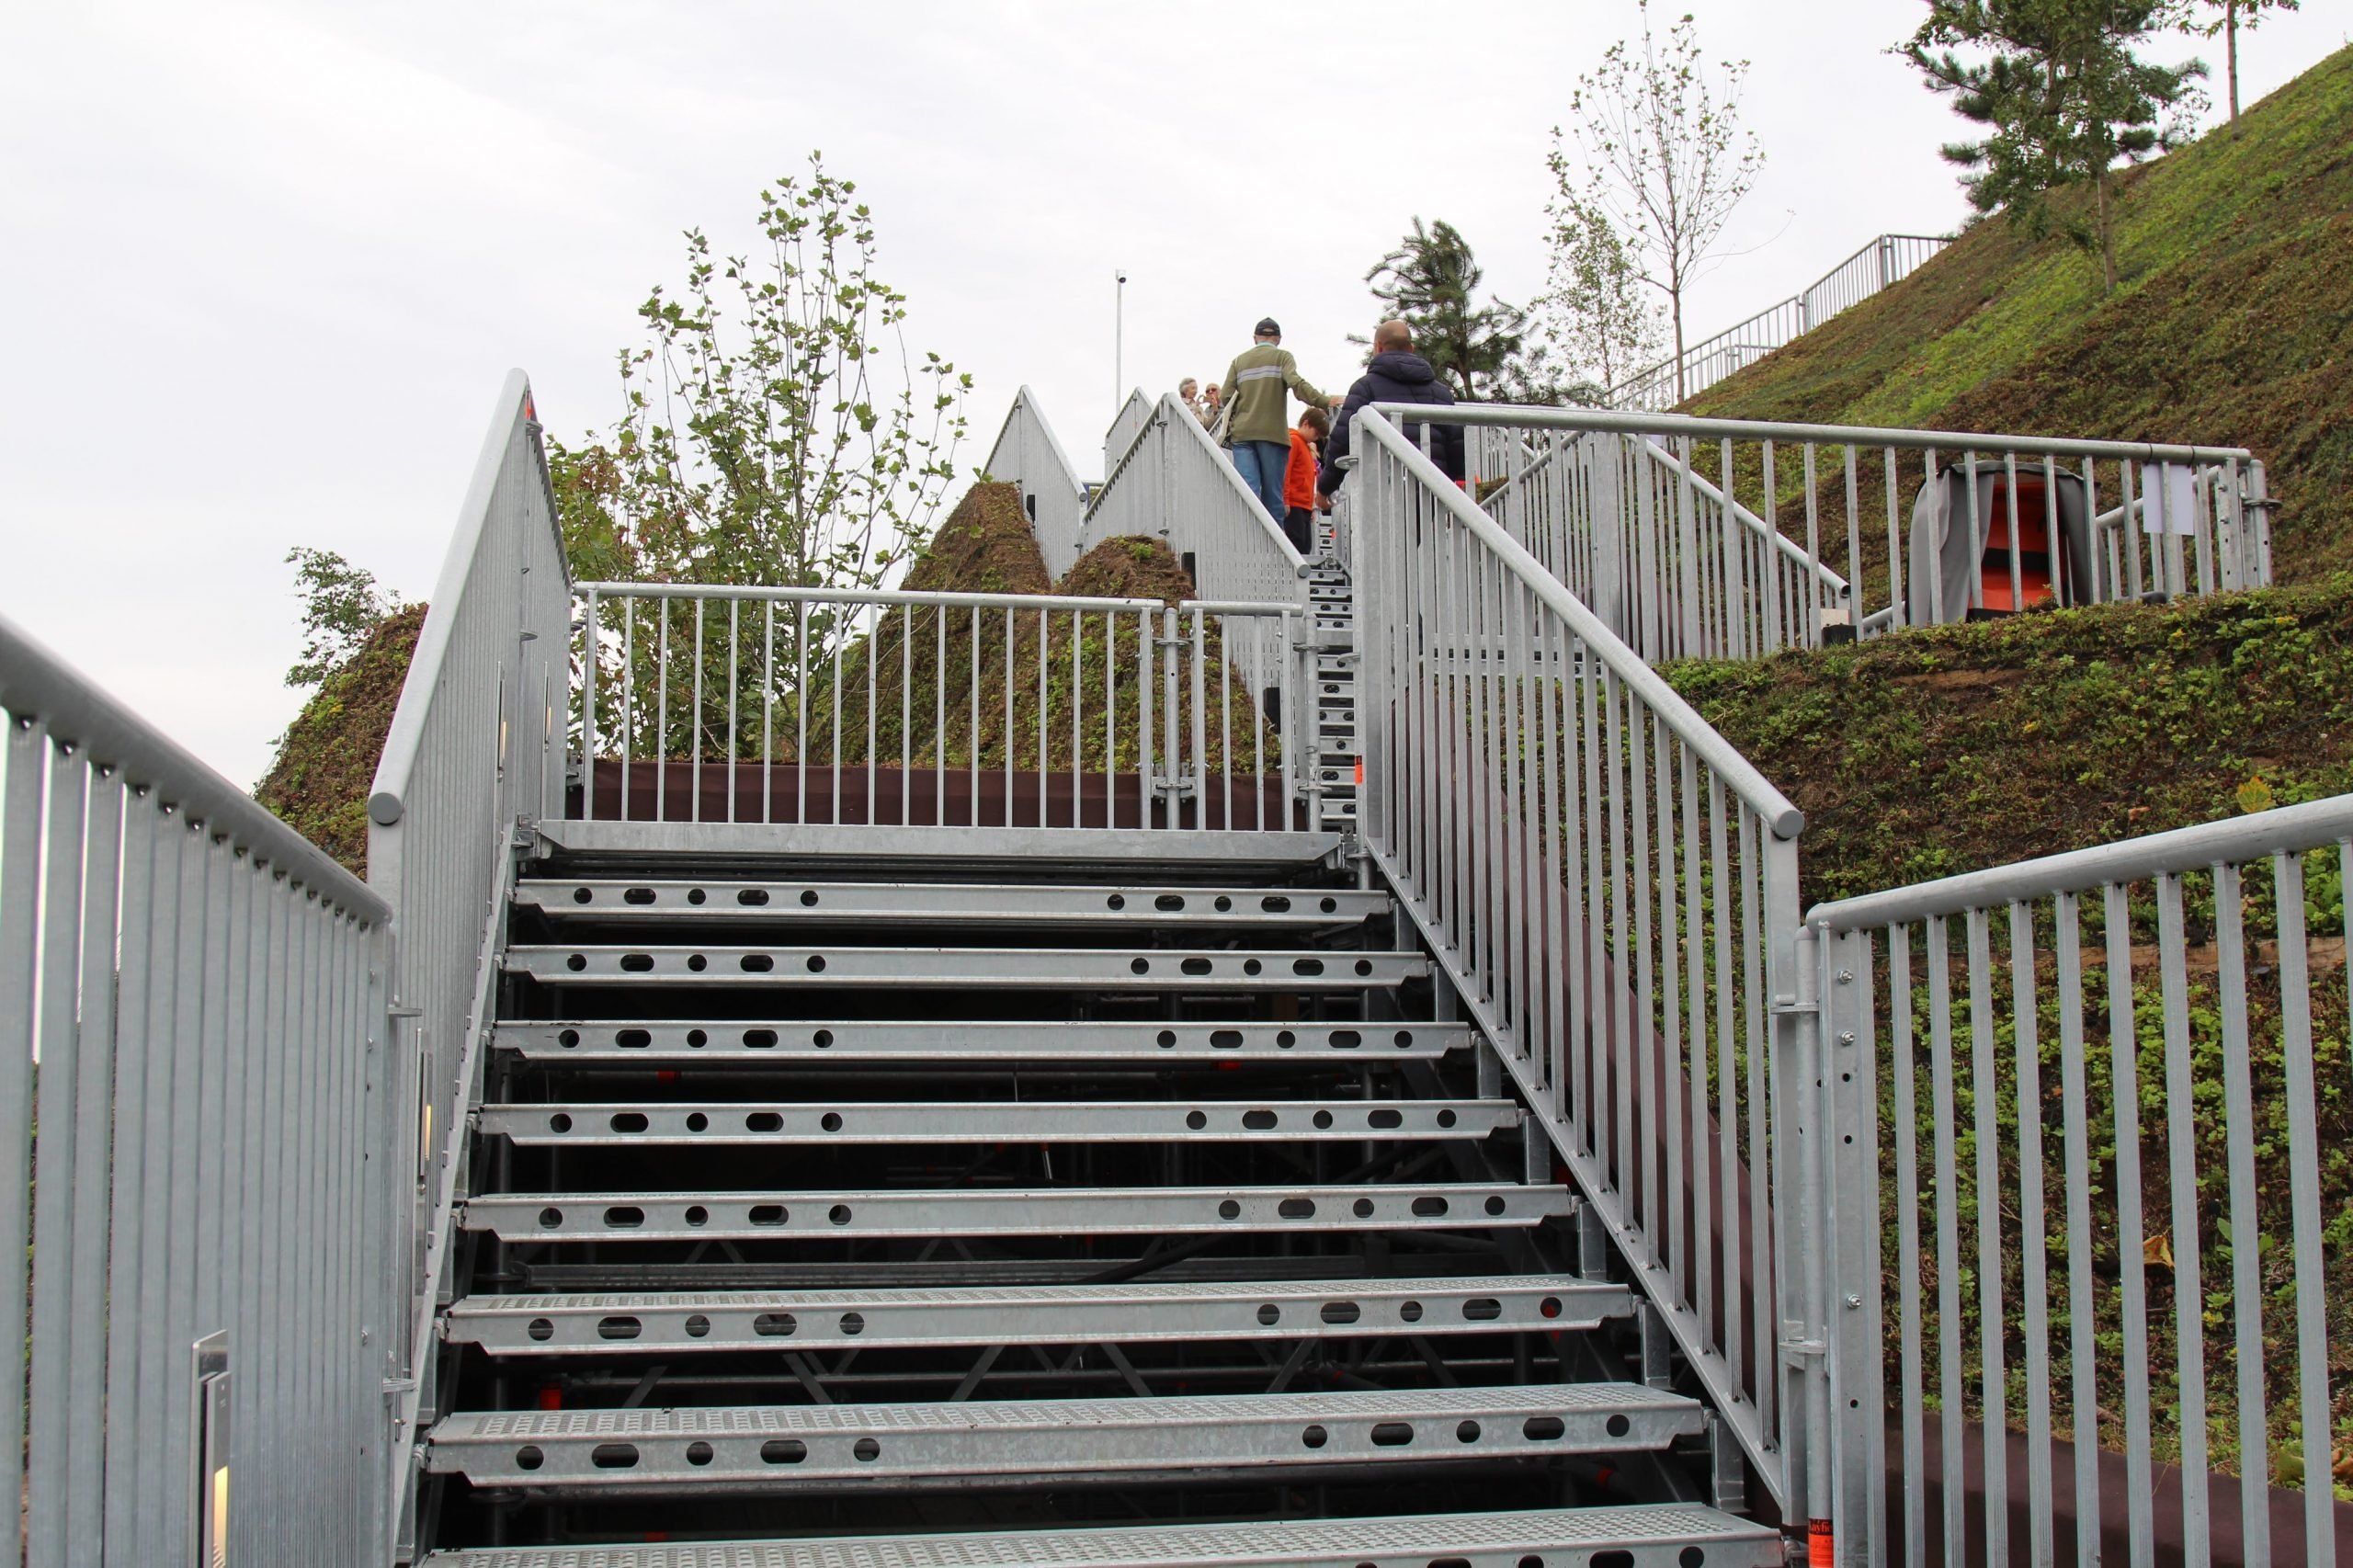 A metal staircase winds its way up an artificial hill in the open air.